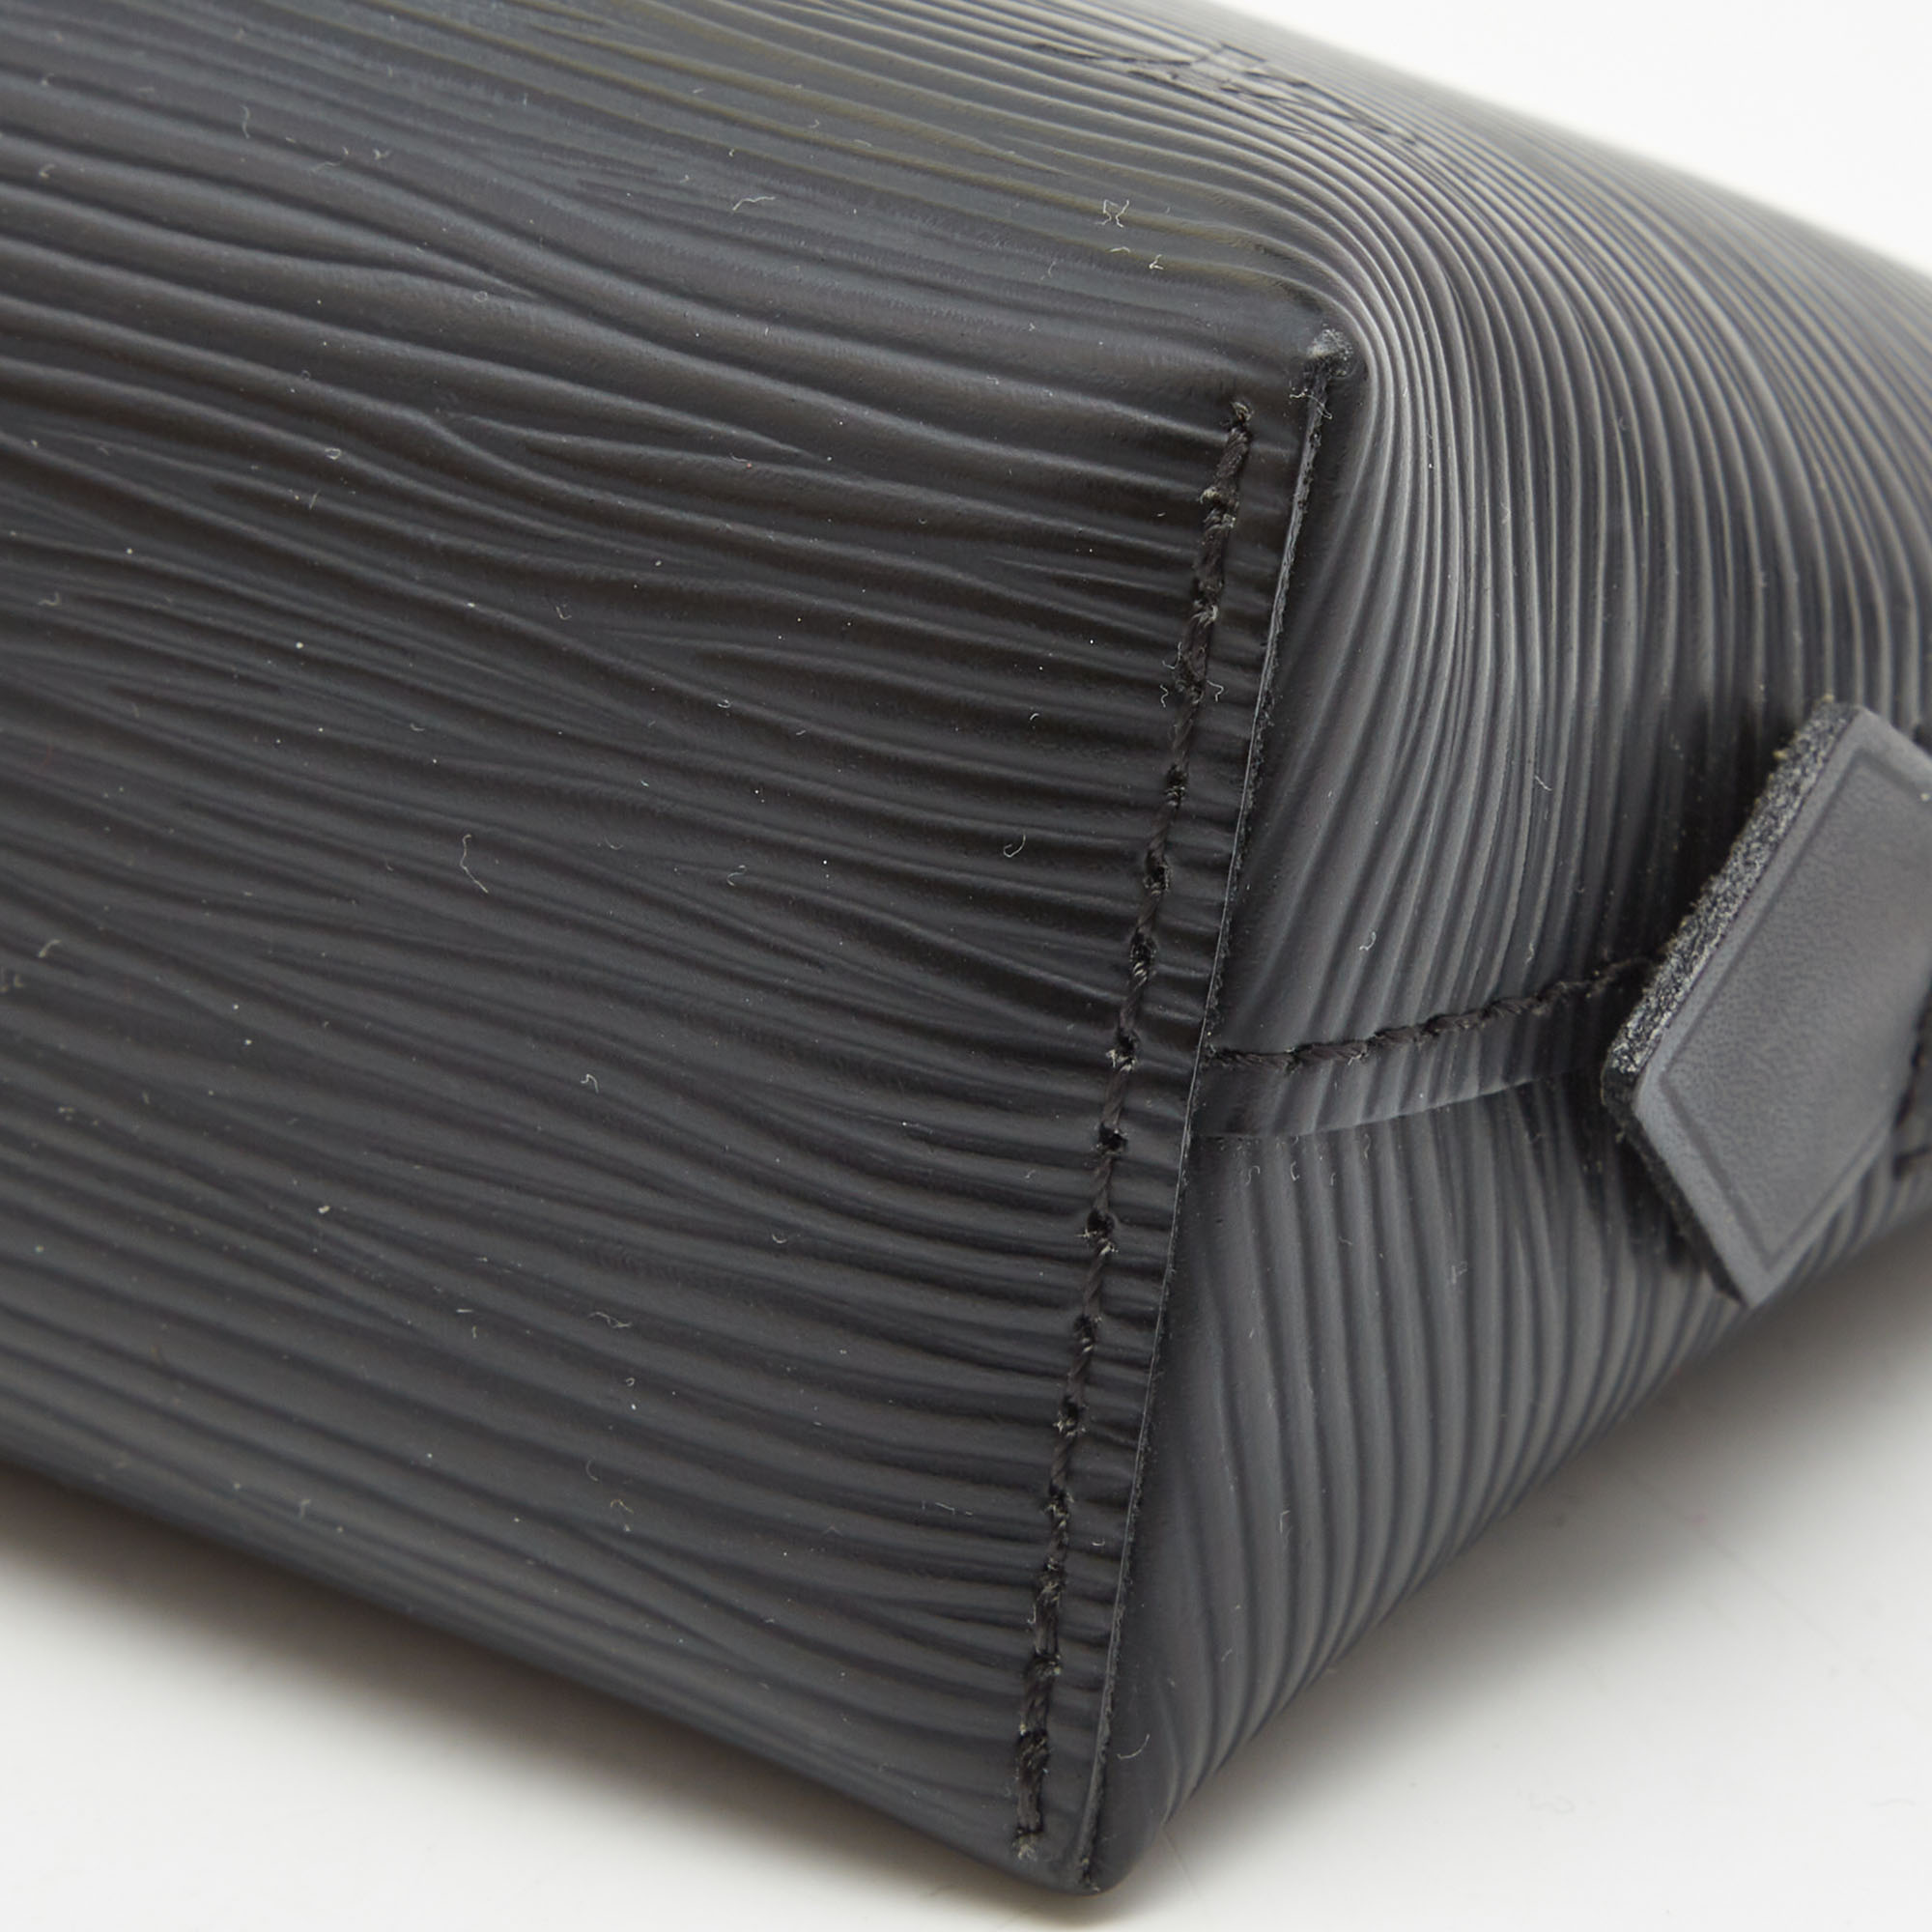 Louis VUITTON Cosmetic pouch in black epi leather, in it…